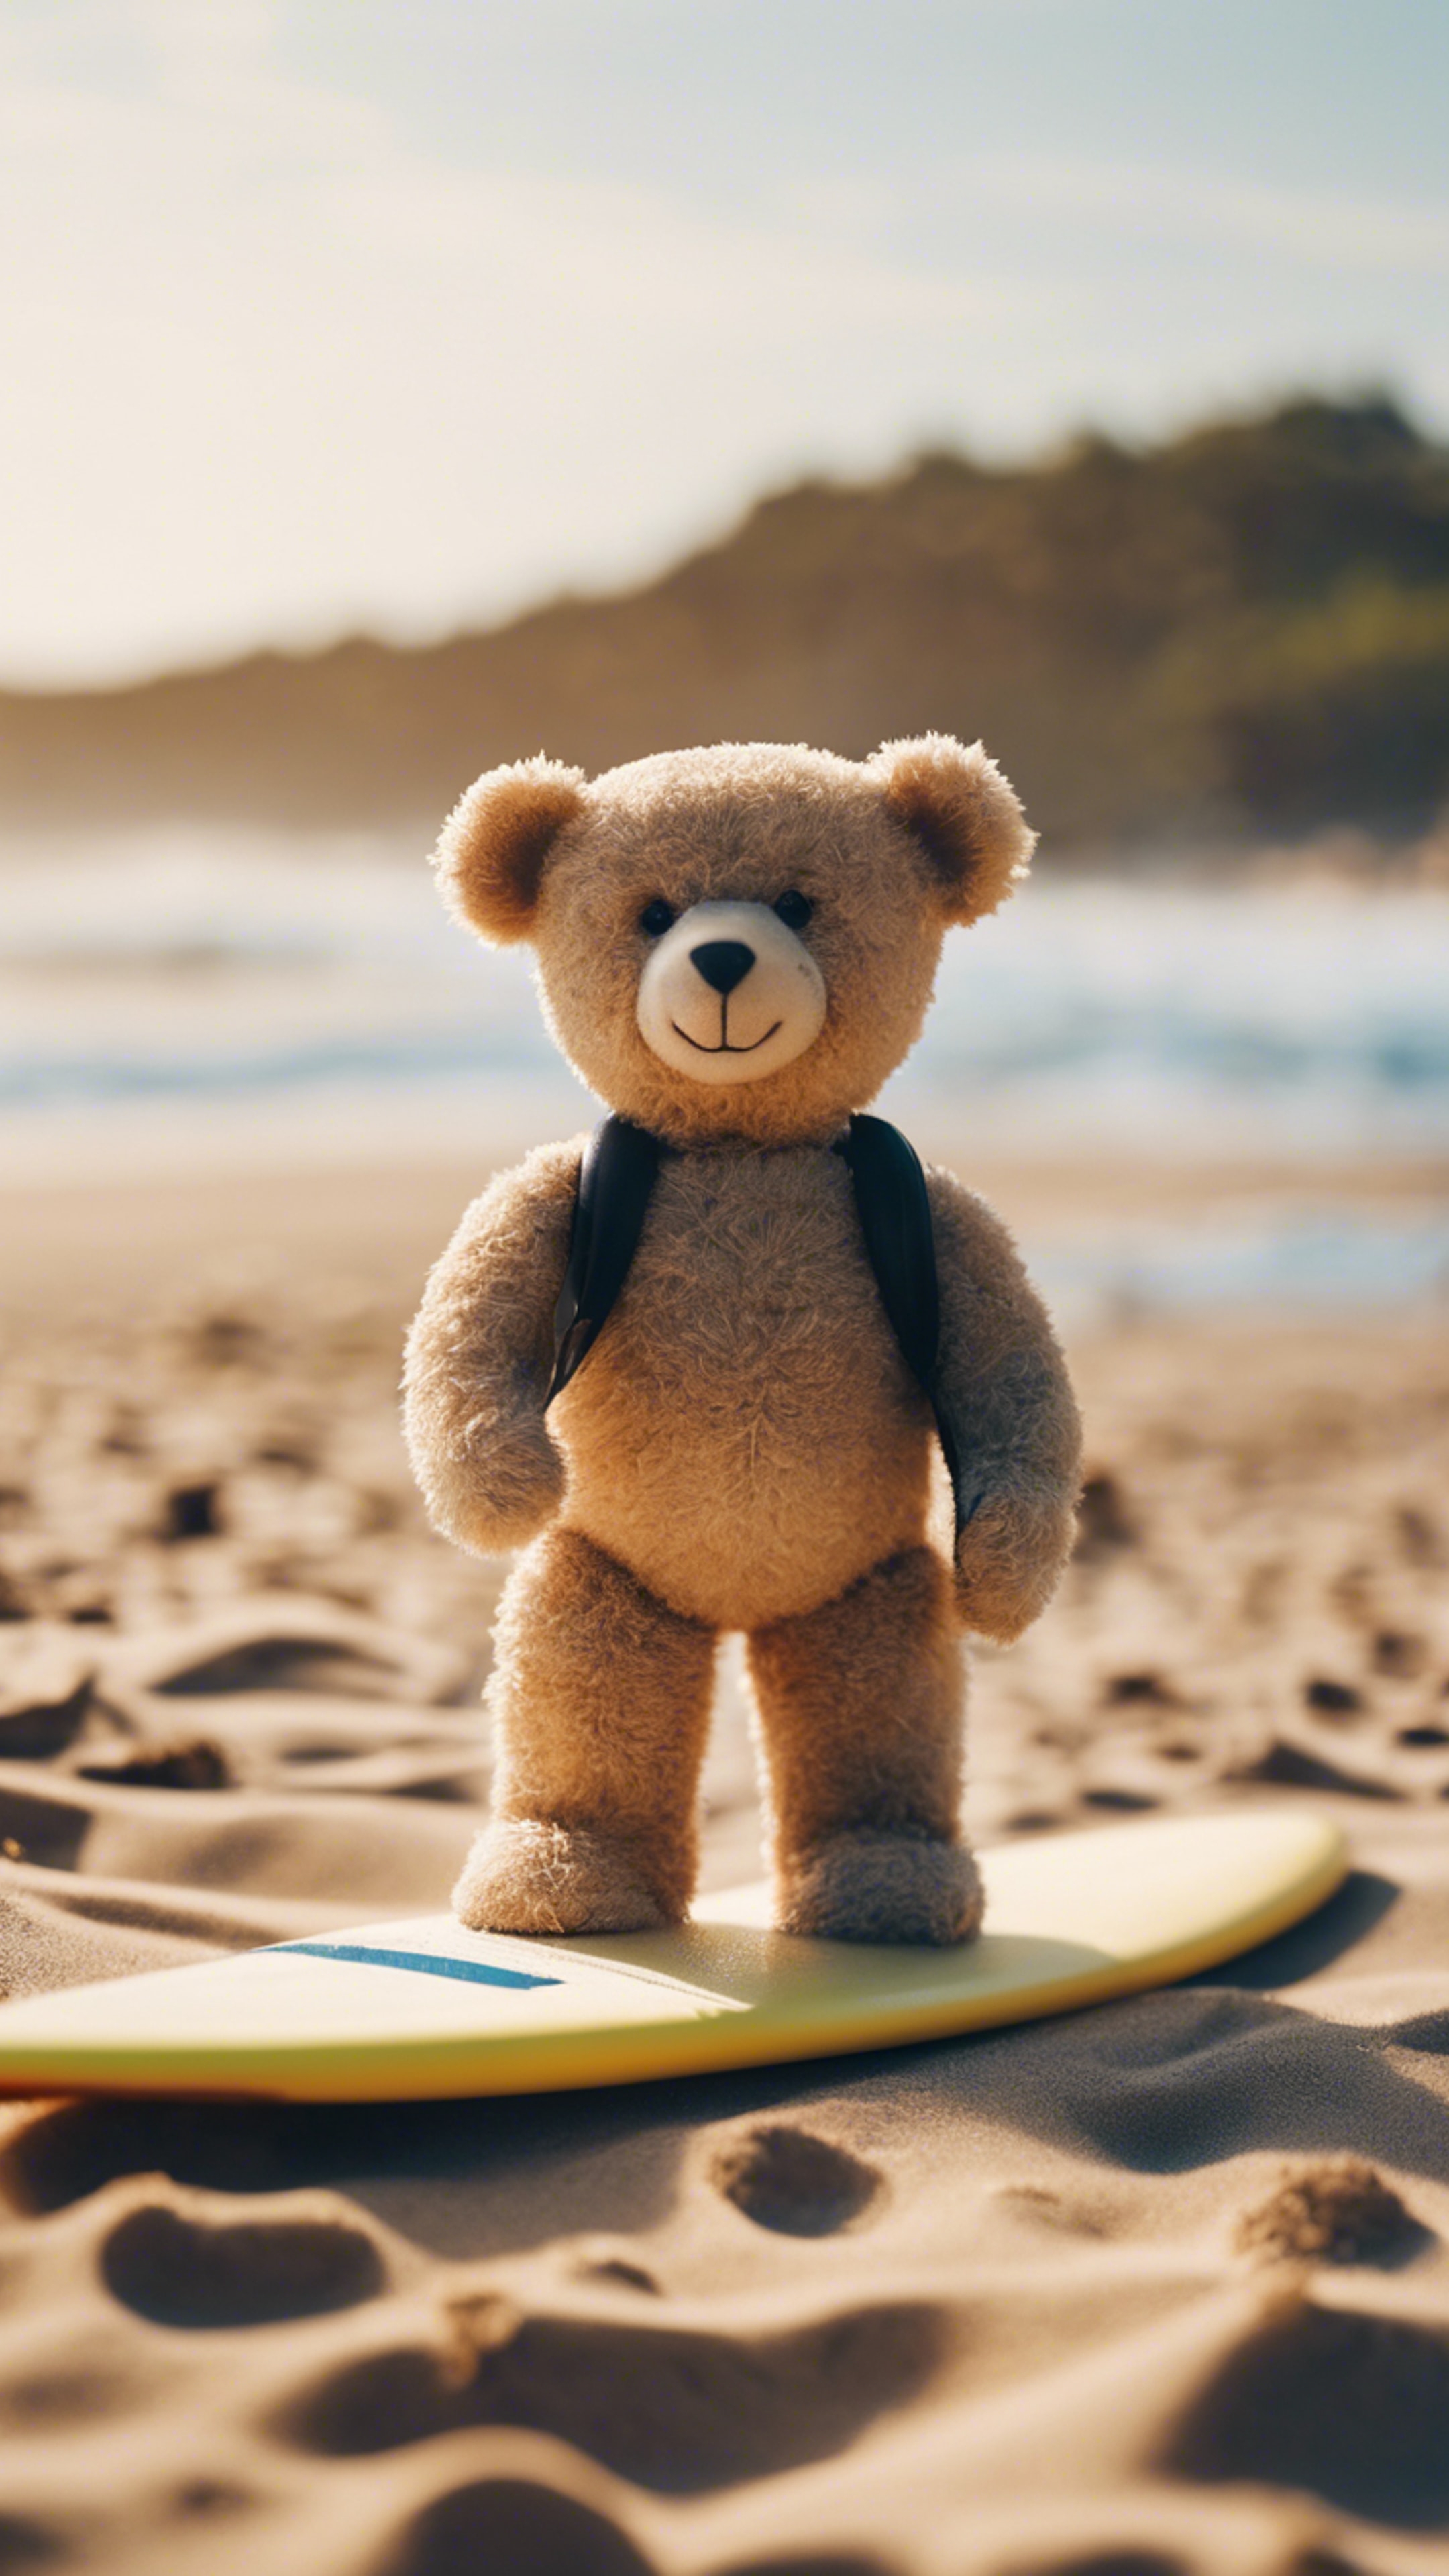 A teddy bear with a surfboard on a sandy beach, ready to ride the toy waves.壁紙[44bf9a8610814c76a429]